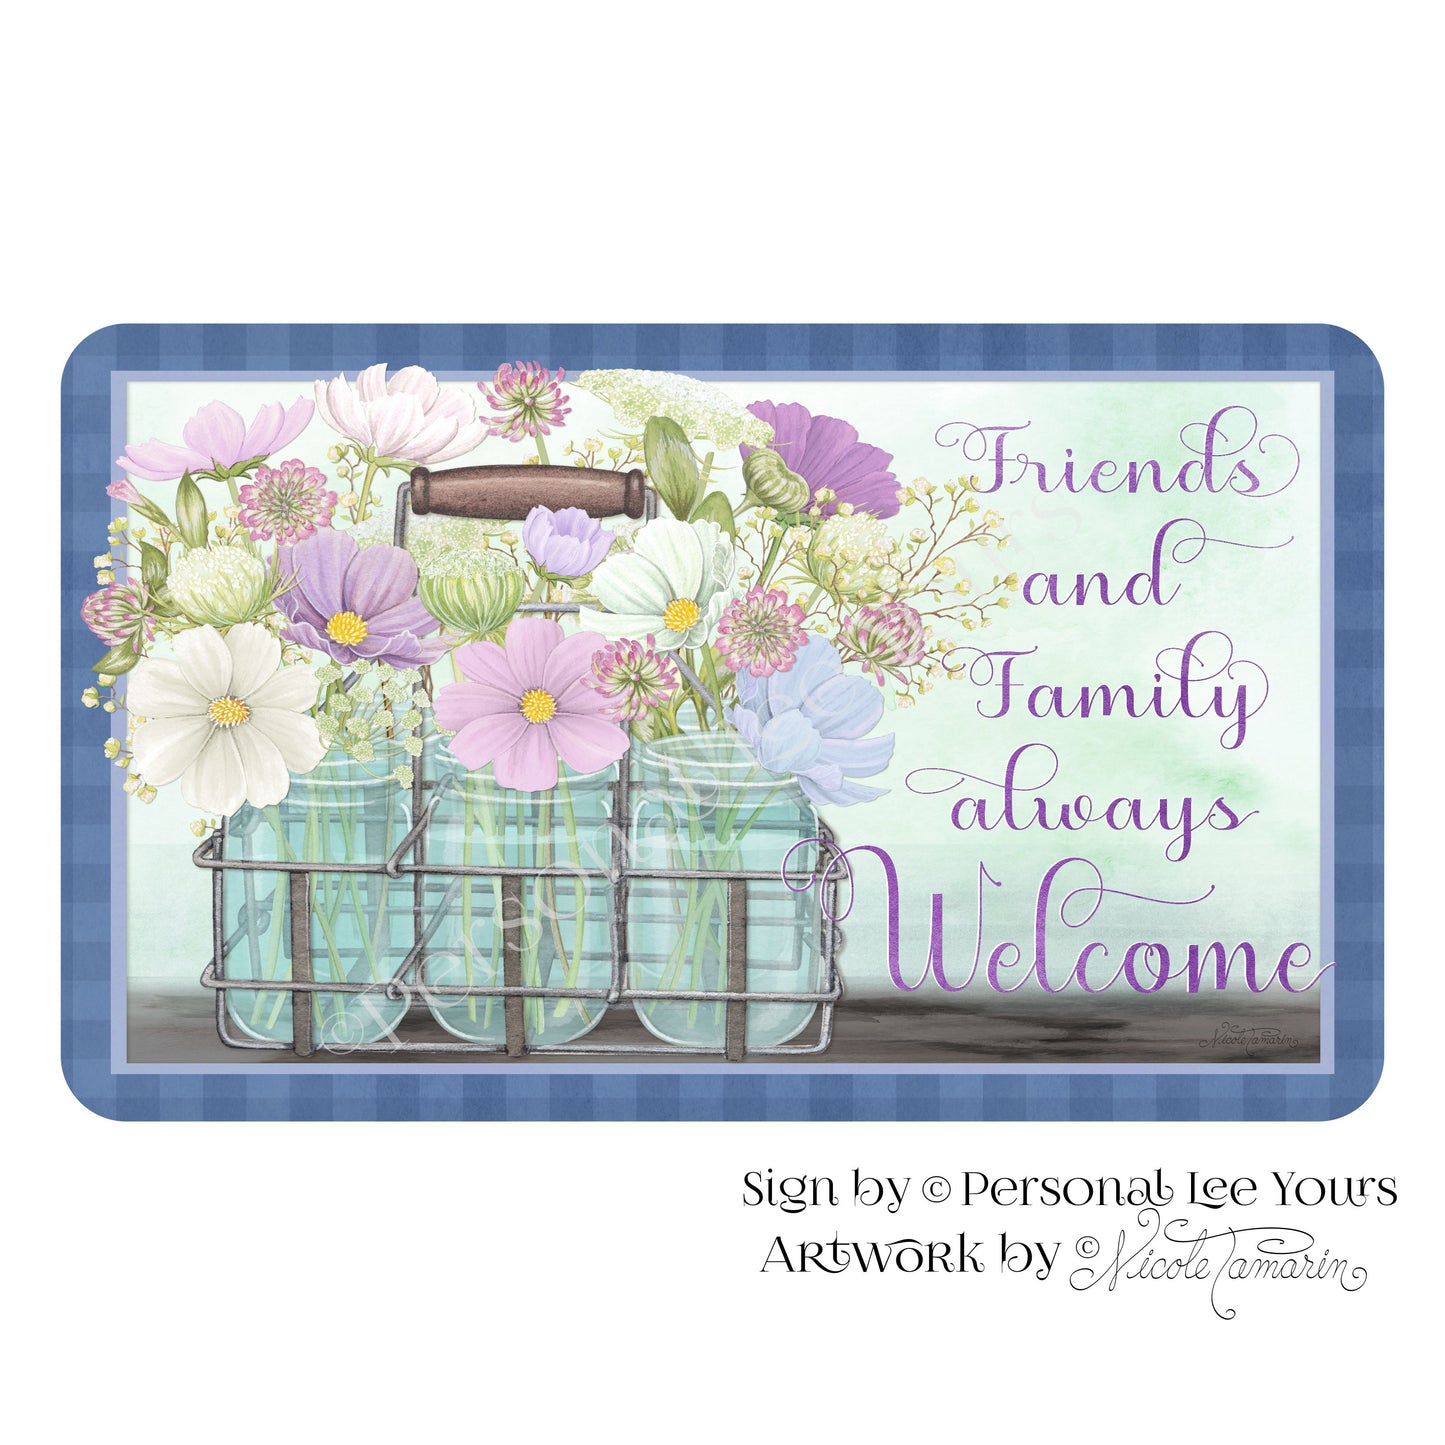 Nicole Tamarin Exclusive Sign * Pretty Little Welcome * Horizontal * 4 Sizes * Lightweight Metal